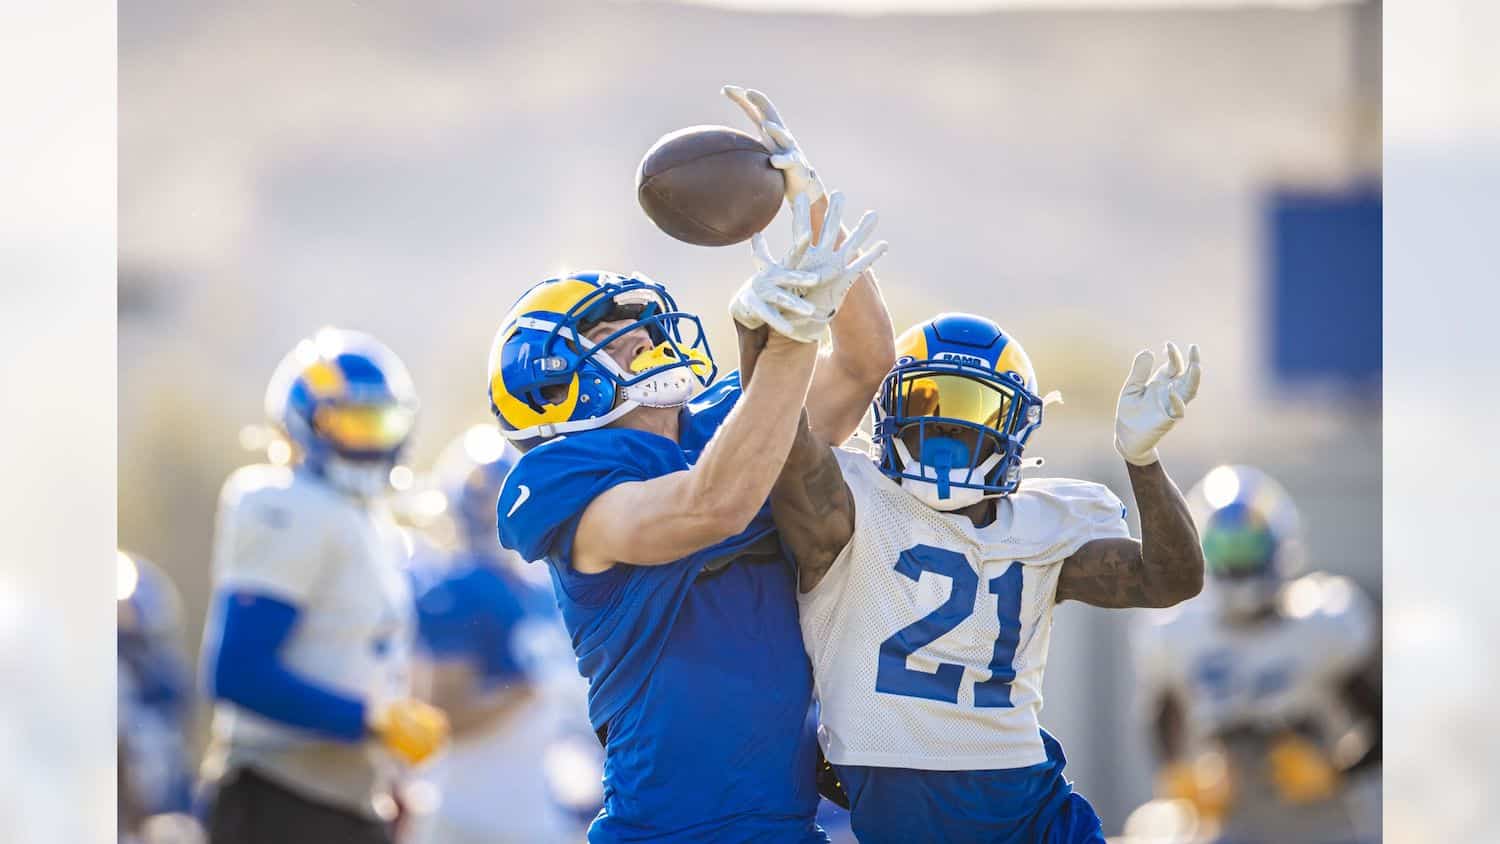 Los Angeles Rams Hit The Practice Field Ahead Of Their Week 6 Matchup Against The New York Giants. Photo Credit: Brevin Townsell | LA Rams